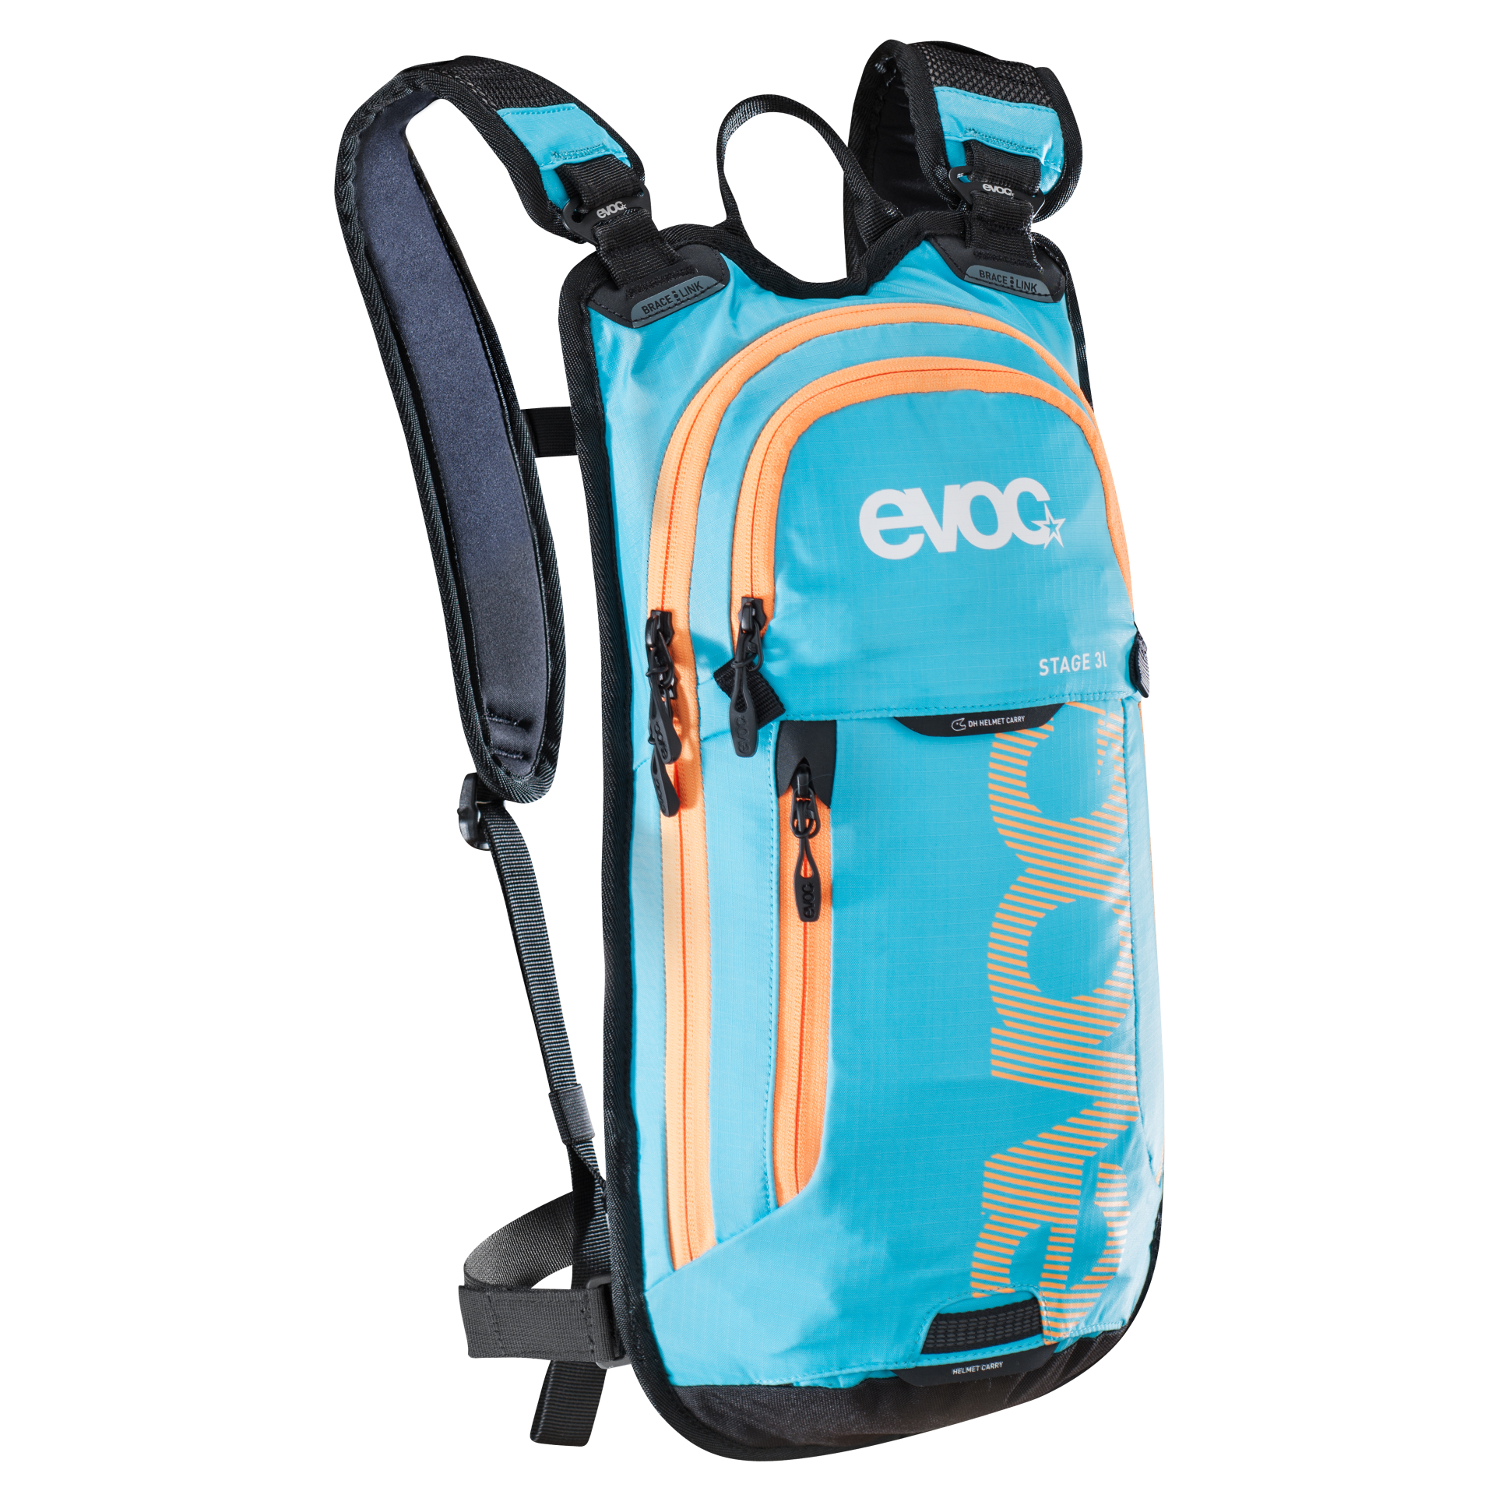 Evoc Backpack with Hydration System Compartment Stage Neon Blue, 3 Liter